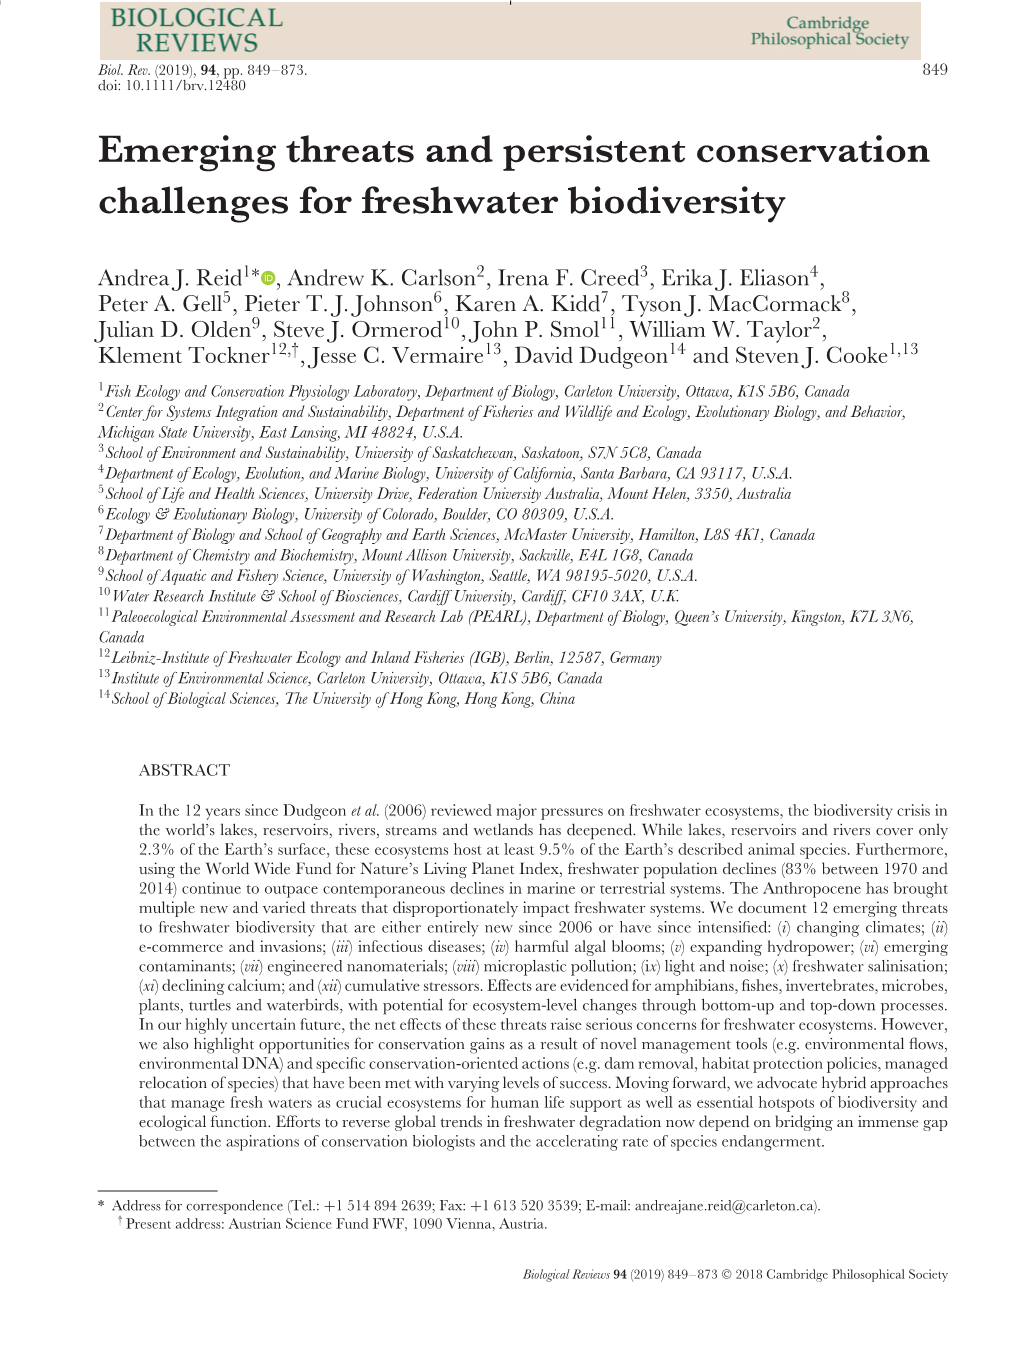 Emerging Threats and Persistent Conservation Challenges for Freshwater Biodiversity